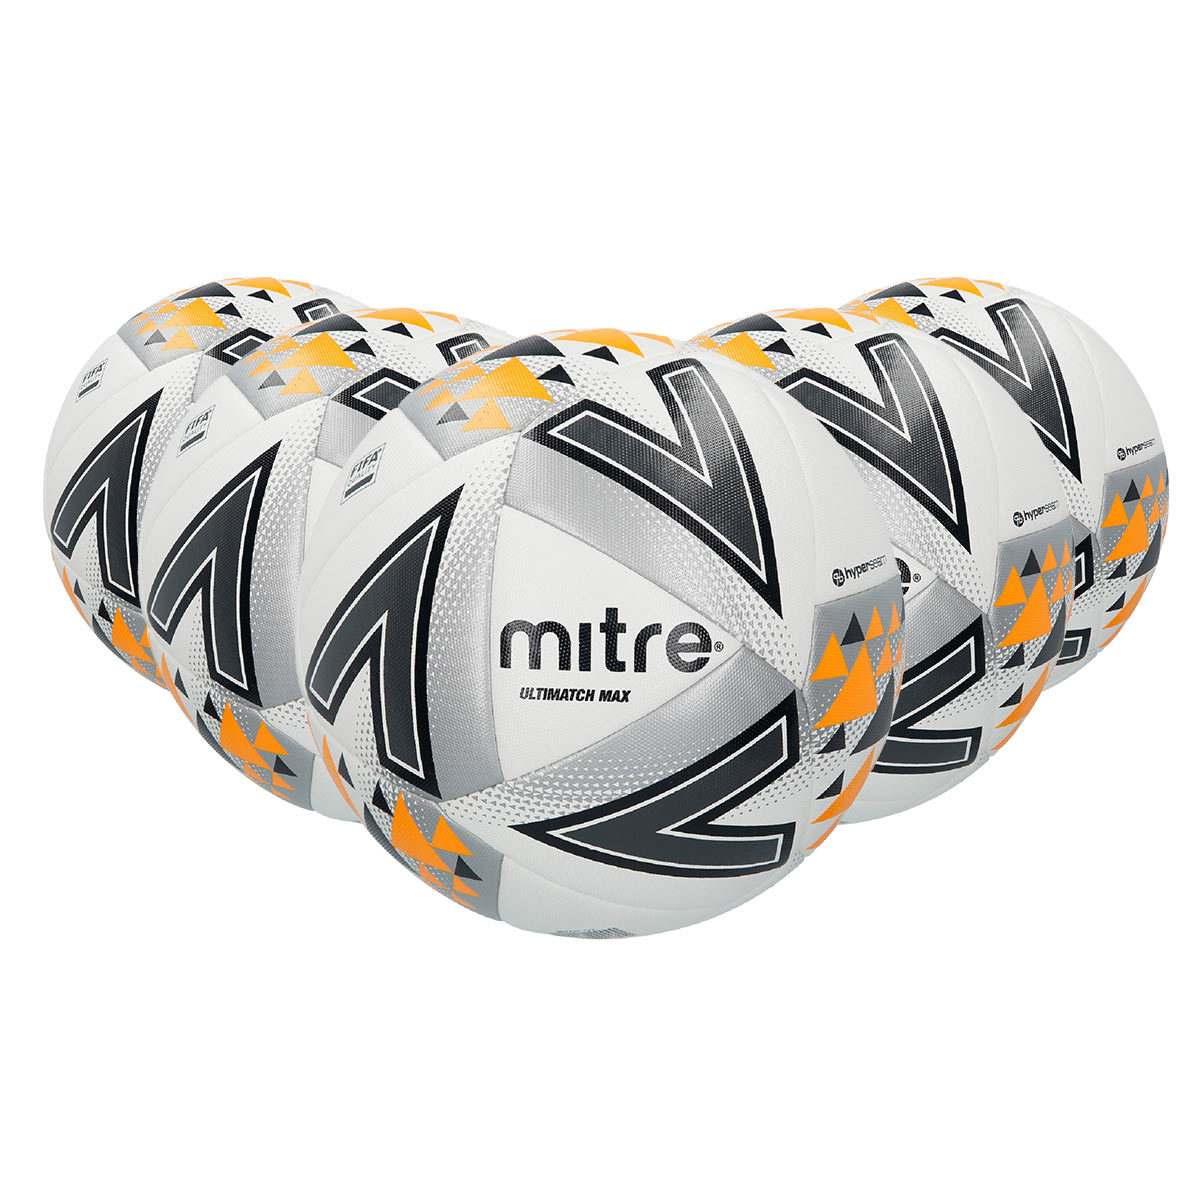 Mitre Ultimatch Max Top-Level Match Football (Size 5) - Pack of 5 With Carry Bag and Pump